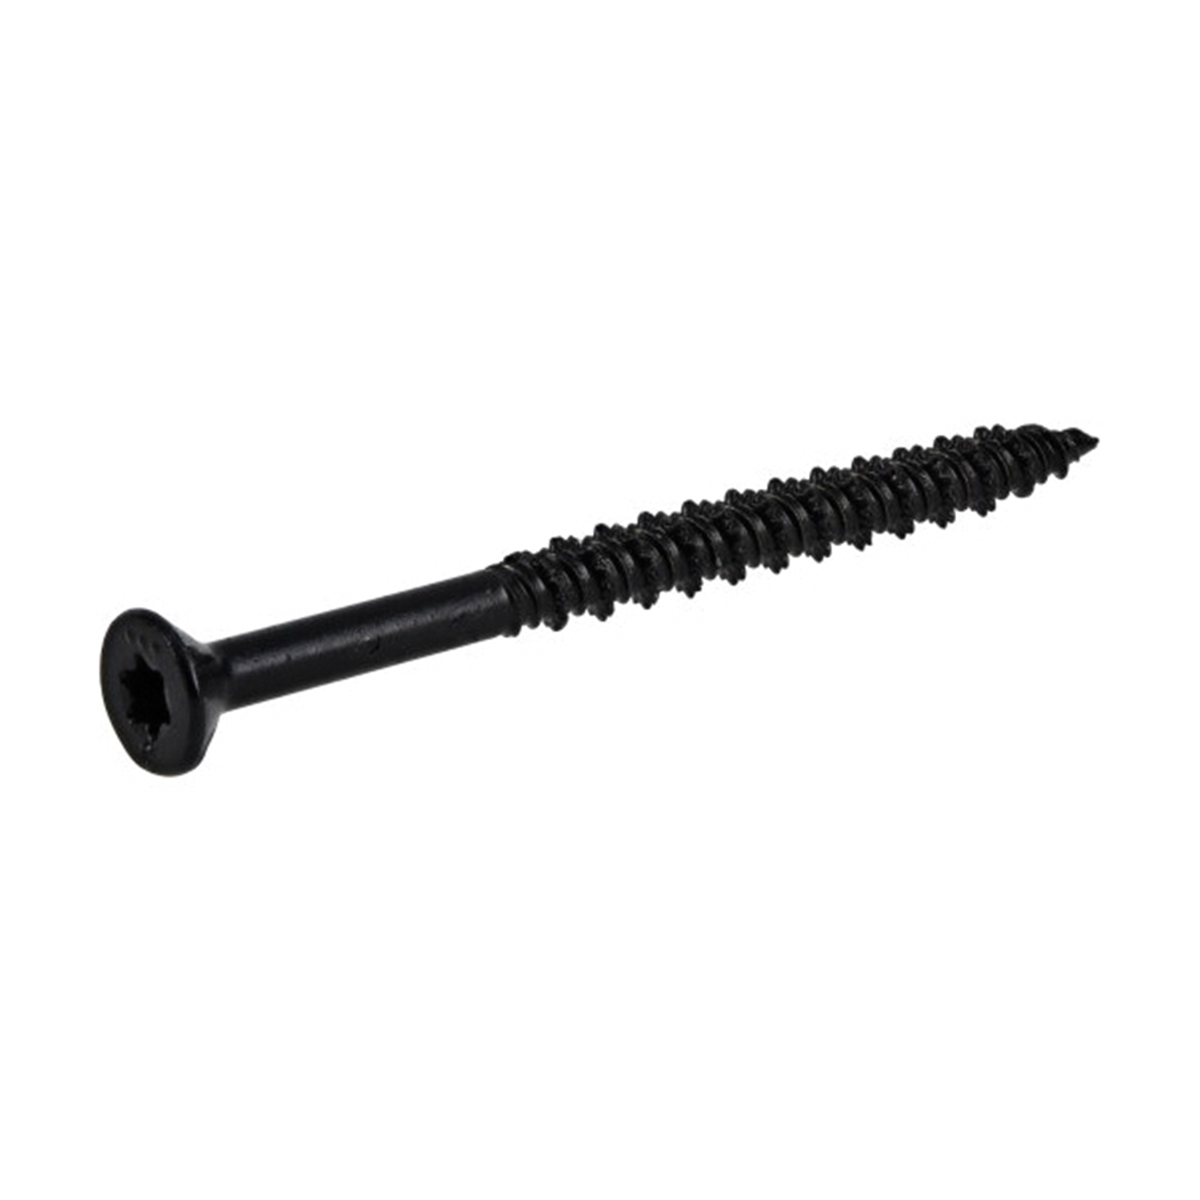 376600 Concrete Screw Anchor, 3/16 in Dia, 2-3/4 in L, Carbon Steel, Epoxy-Coated, 100/PK